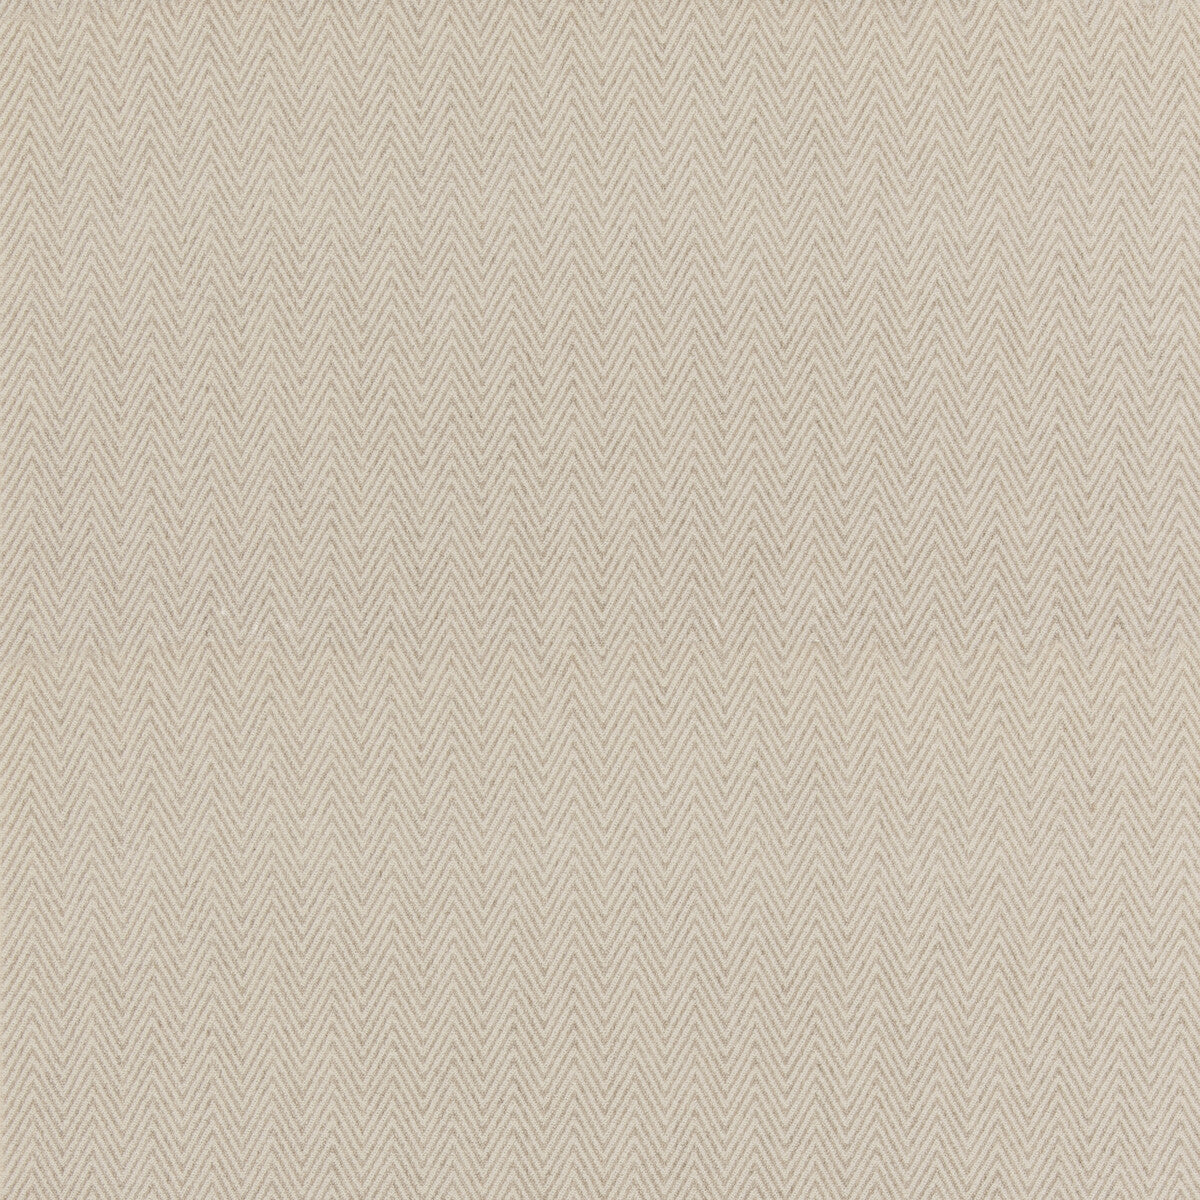 Medina fabric in parchment color - pattern ED85377.225.0 - by Threads in the Quintessential Textures collection